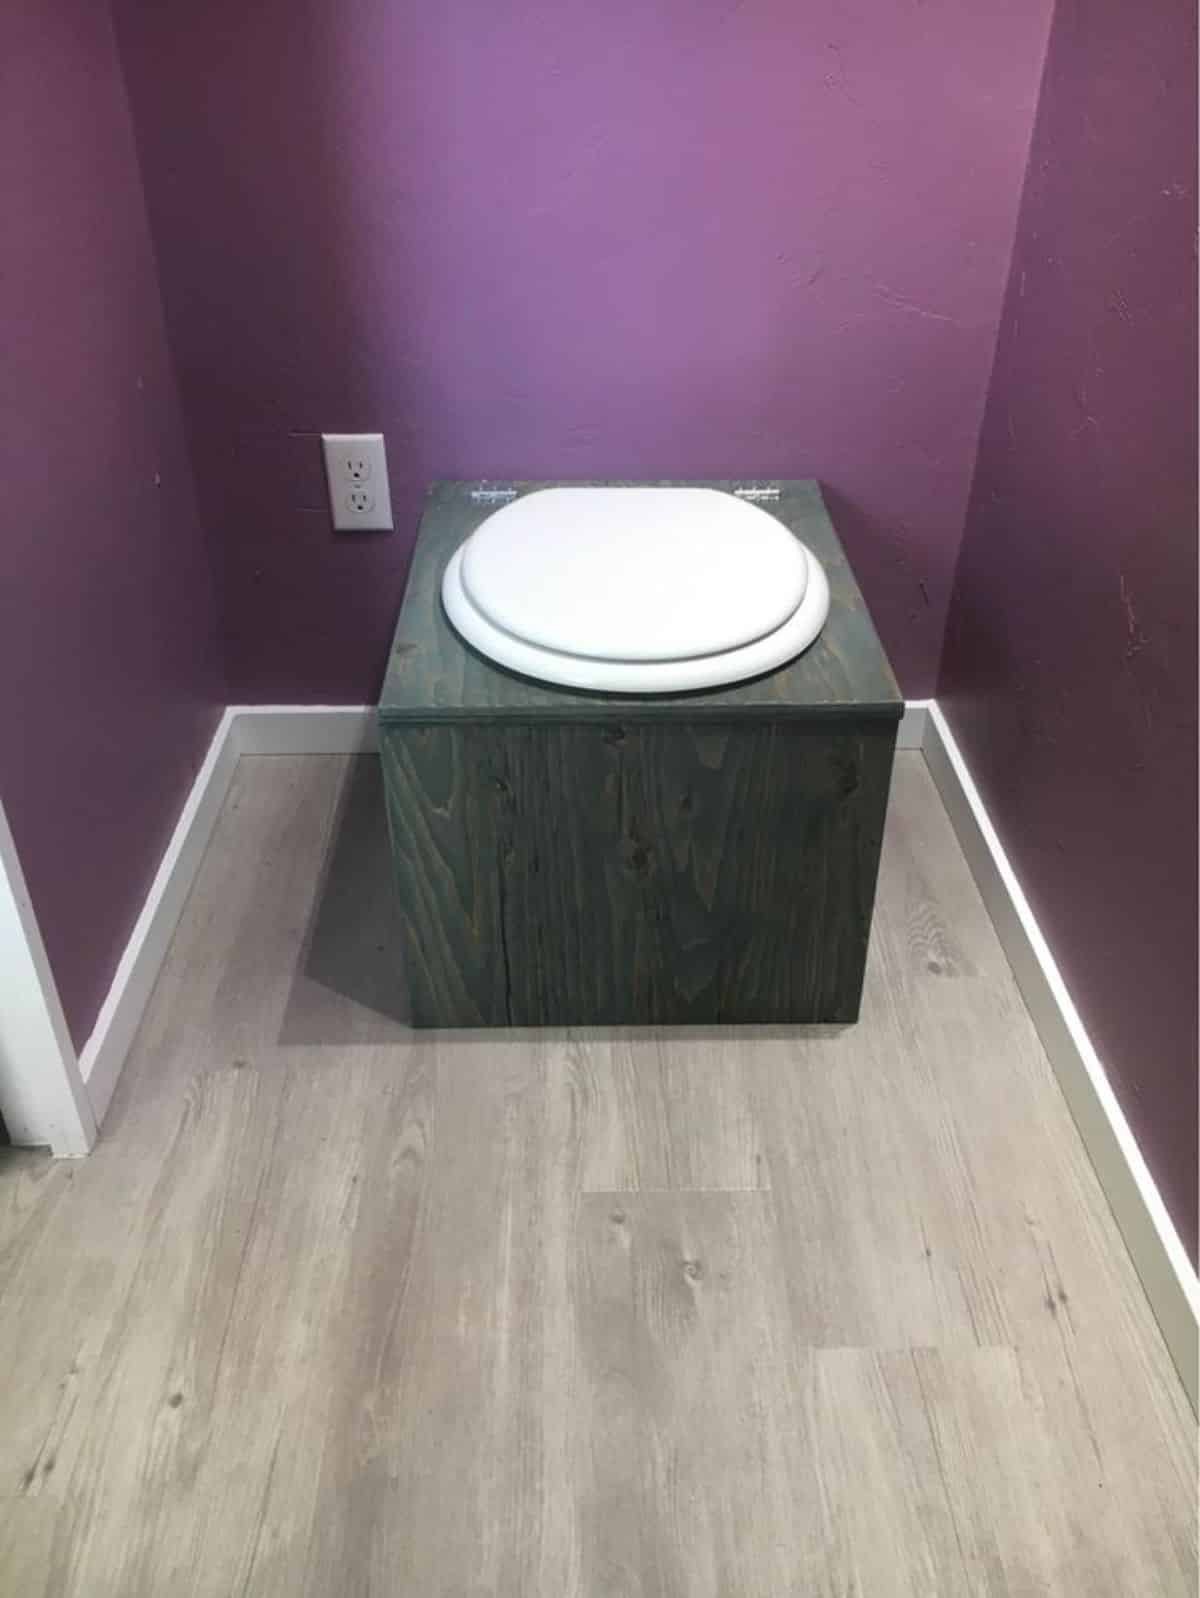 Composting toilet in bathroom of 25' Tiny House